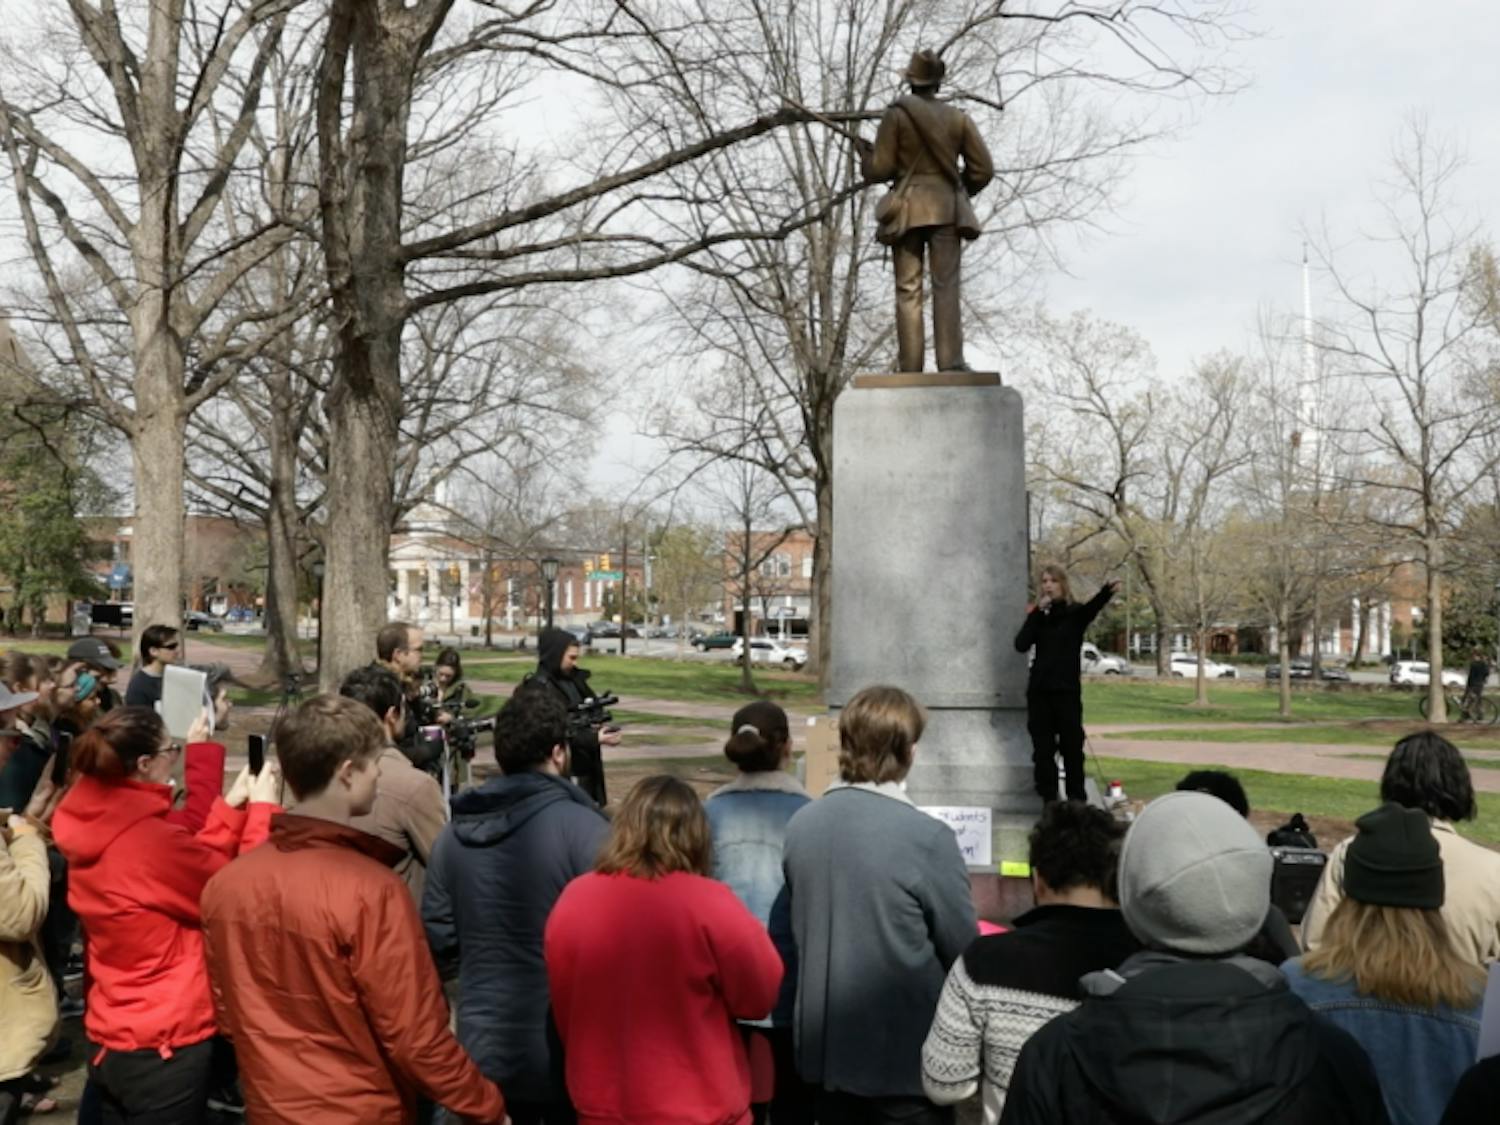 Chelsea Manning gives a speech in front of the Silent Sam monument during a rally on Saturday afternoon.